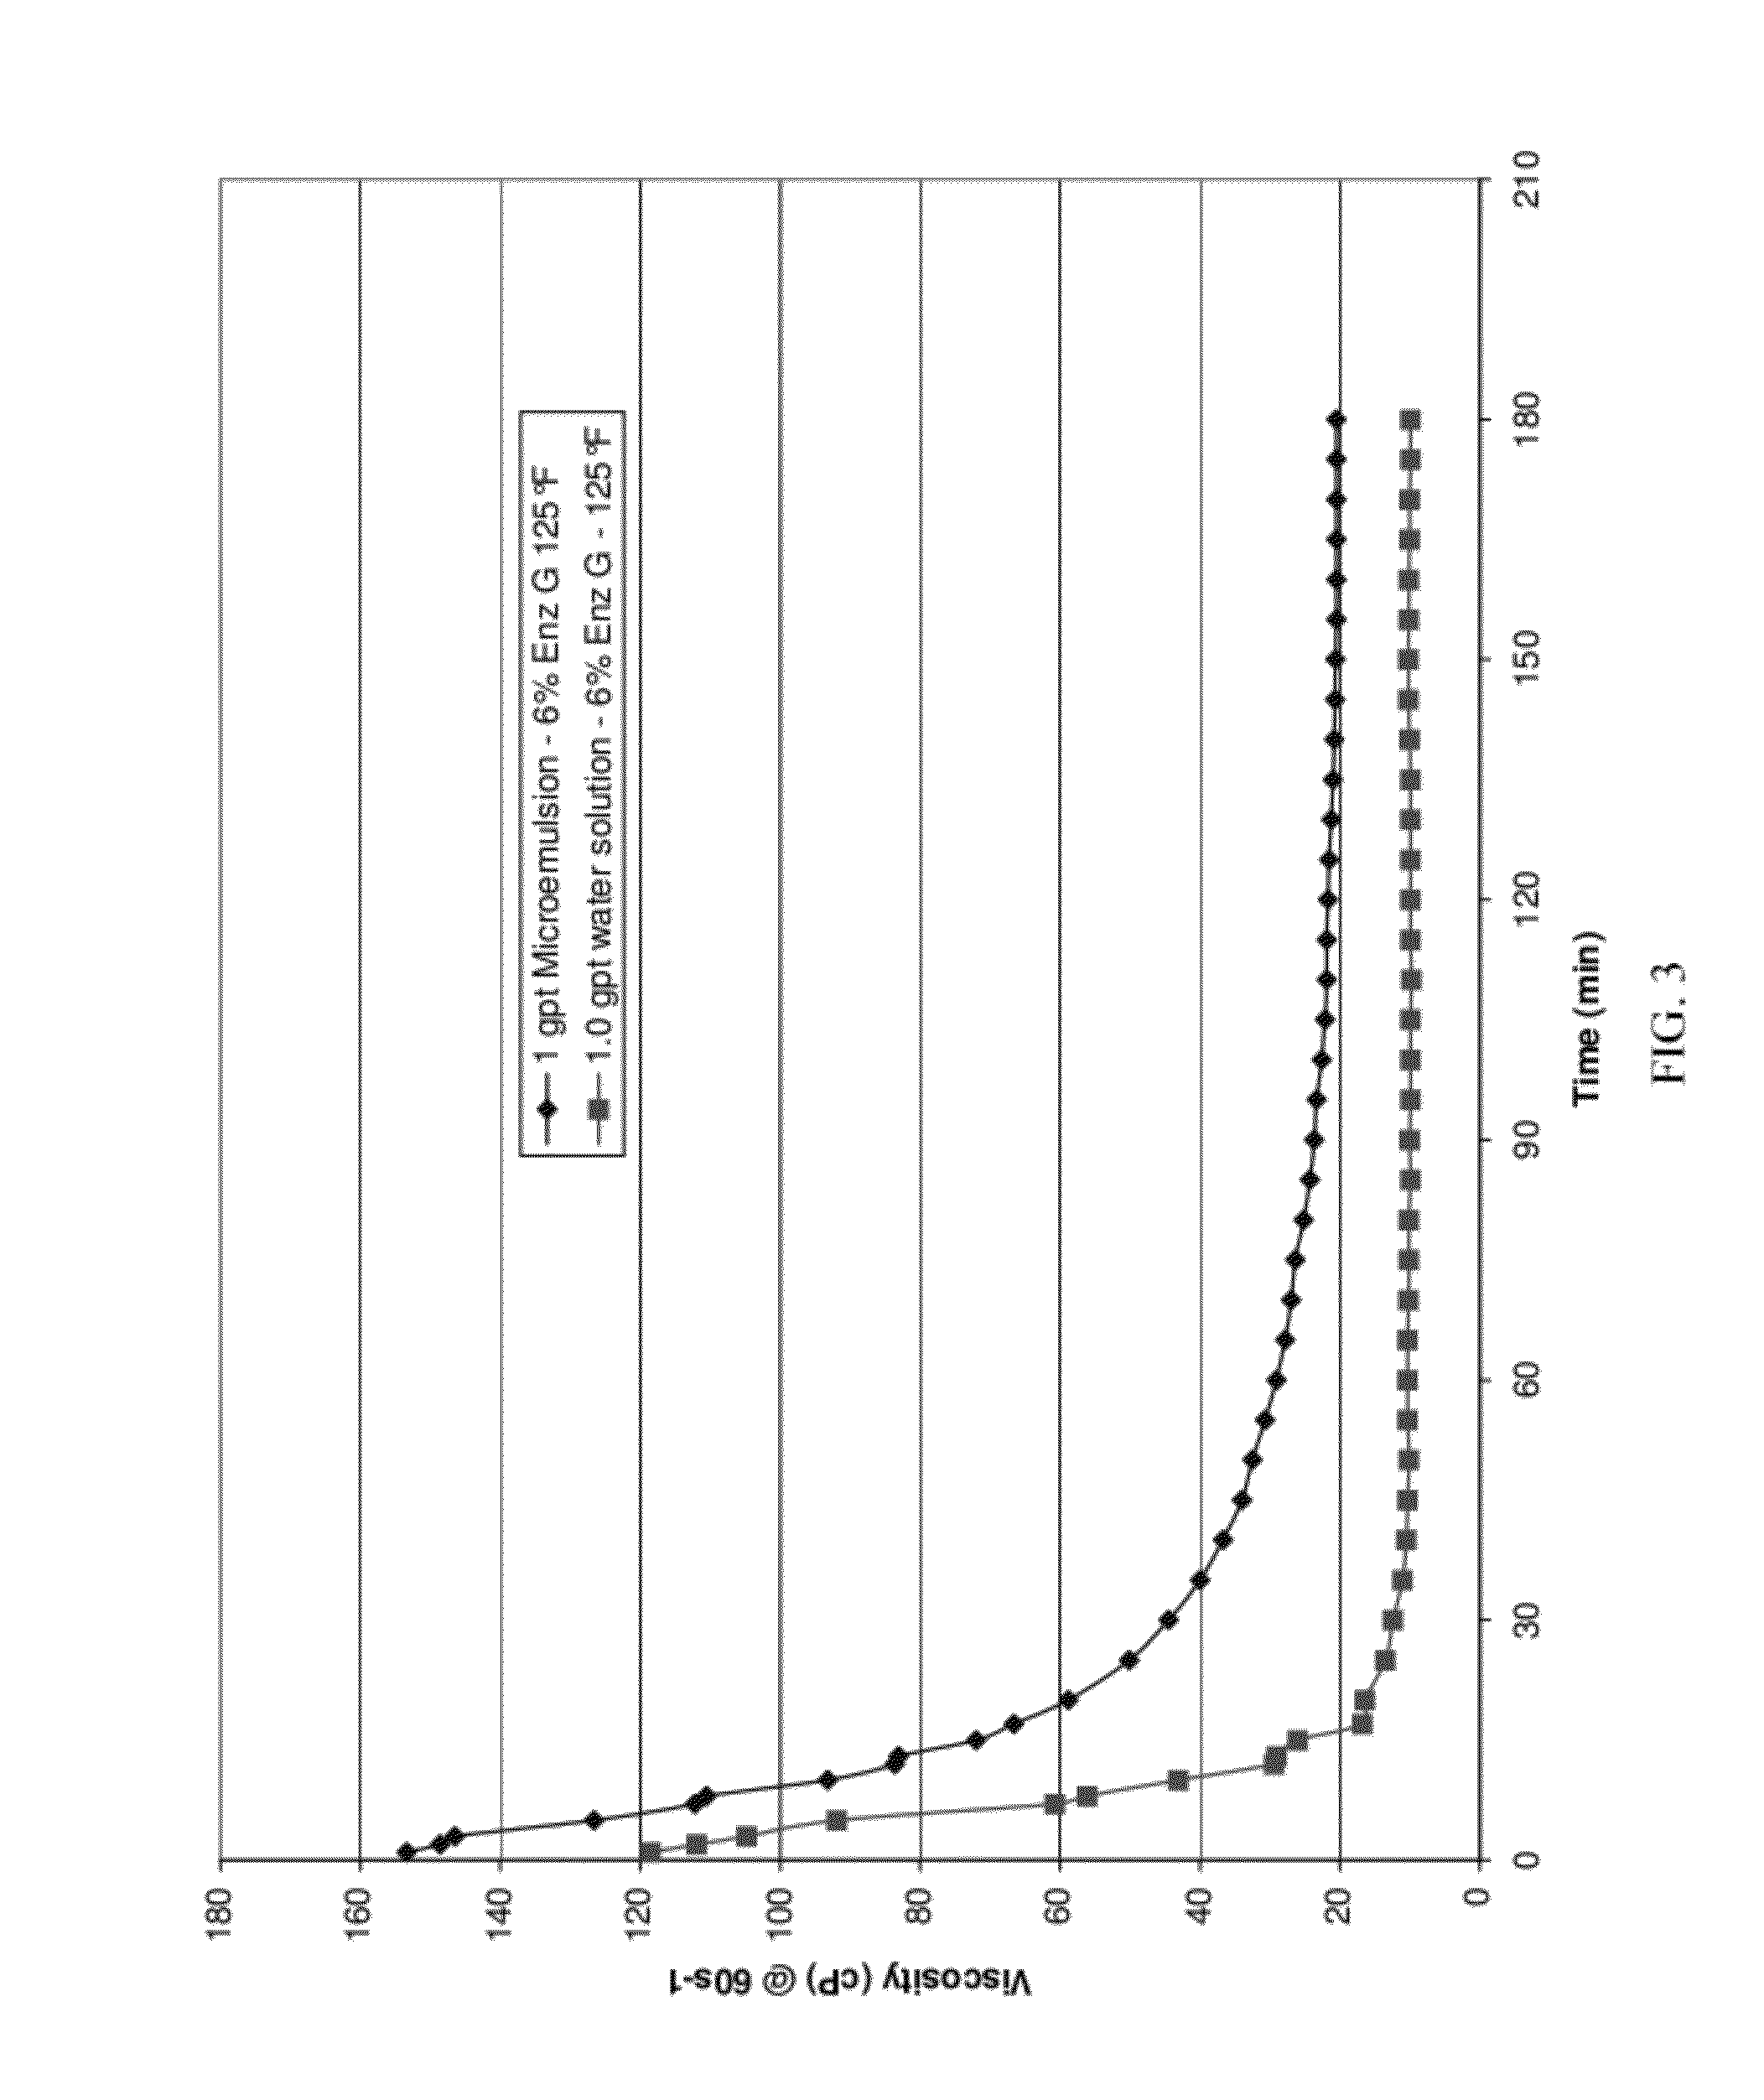 Method of inhibiting or controlling release of well treatment agent